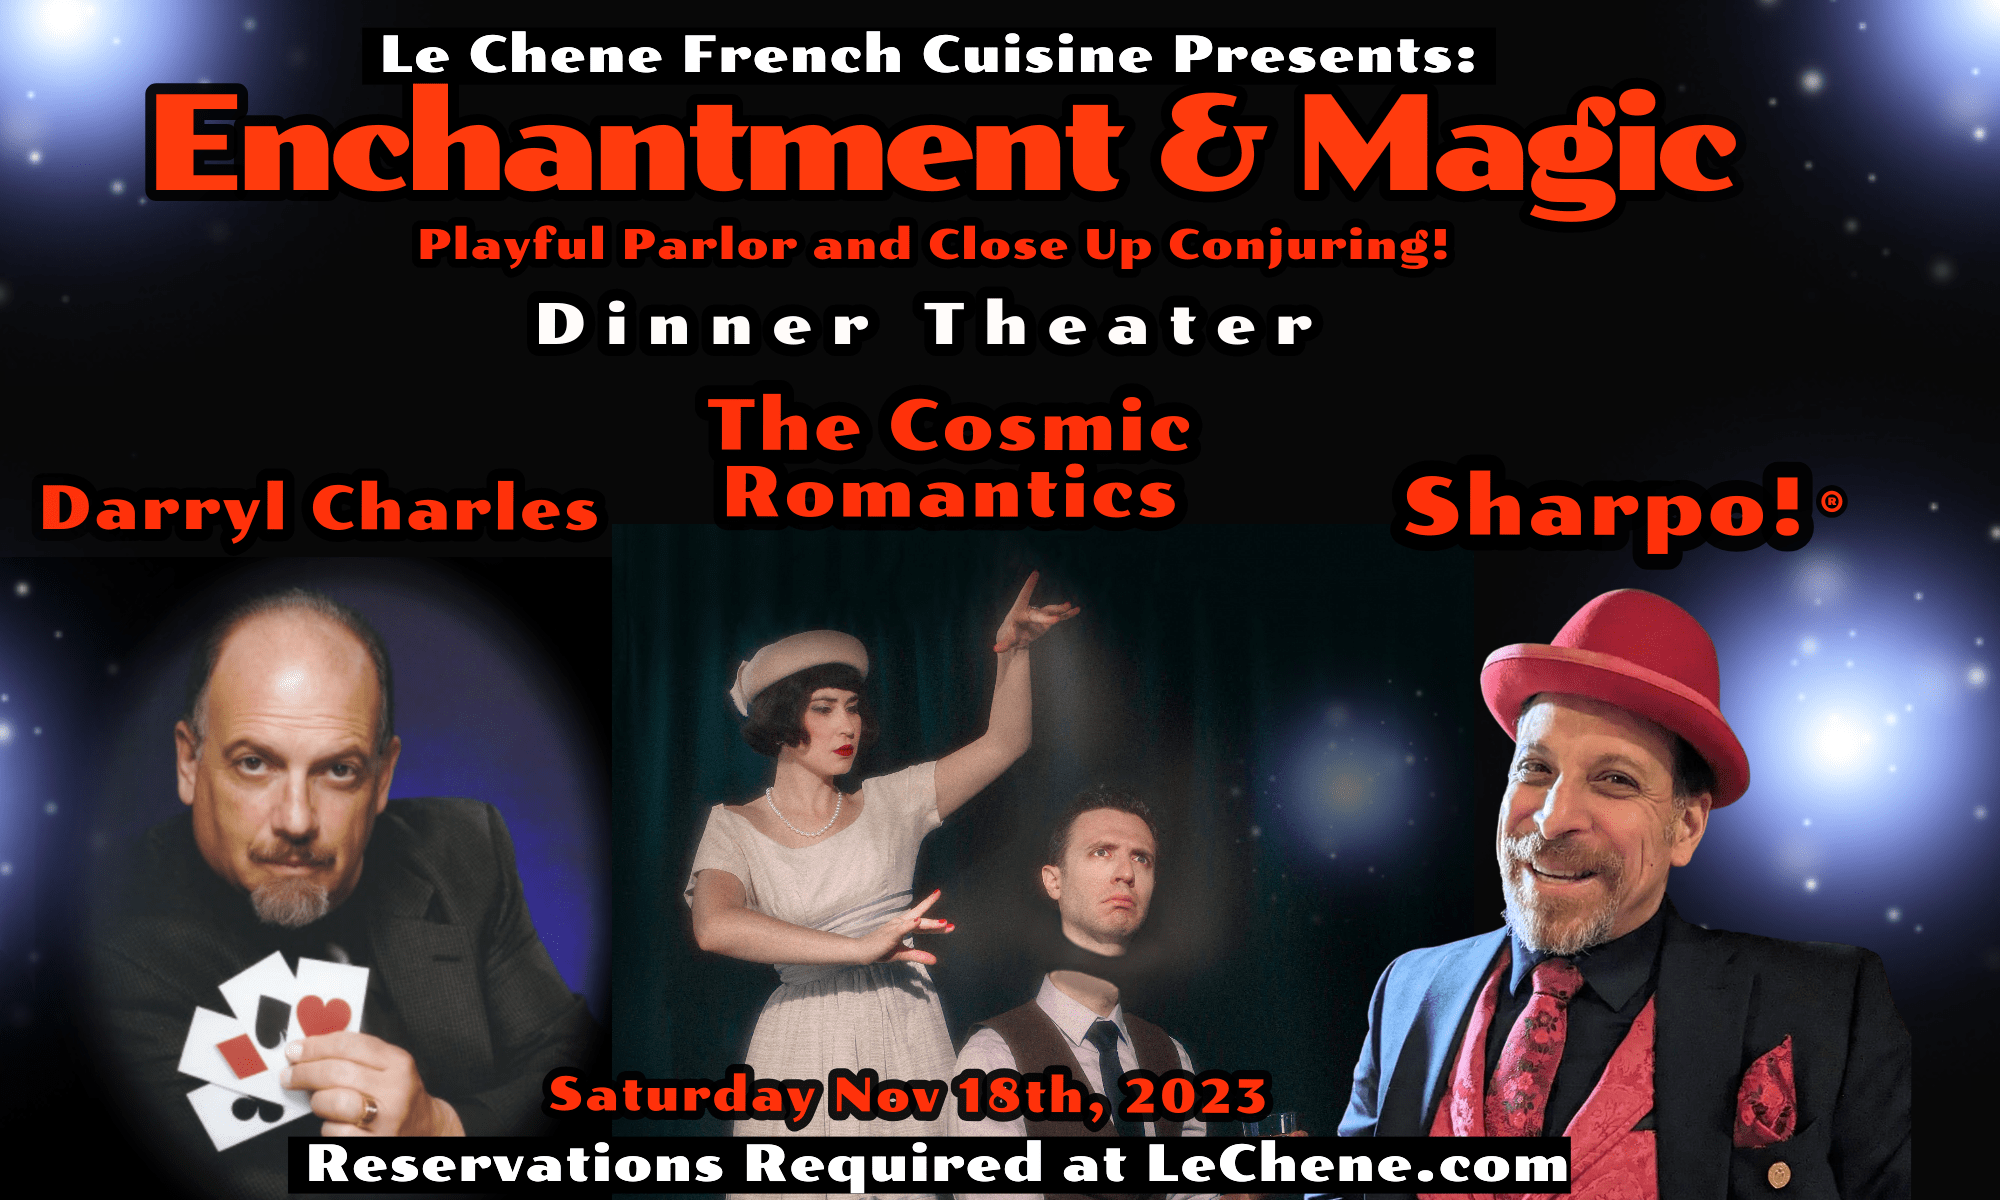 Enchantment & Magic Dinner Theater at Le Chene!  11/18/23  Hosted By Mischief Maker Sharpo & special guest star magicians, The Cosmic Romantics & Darryl Charles